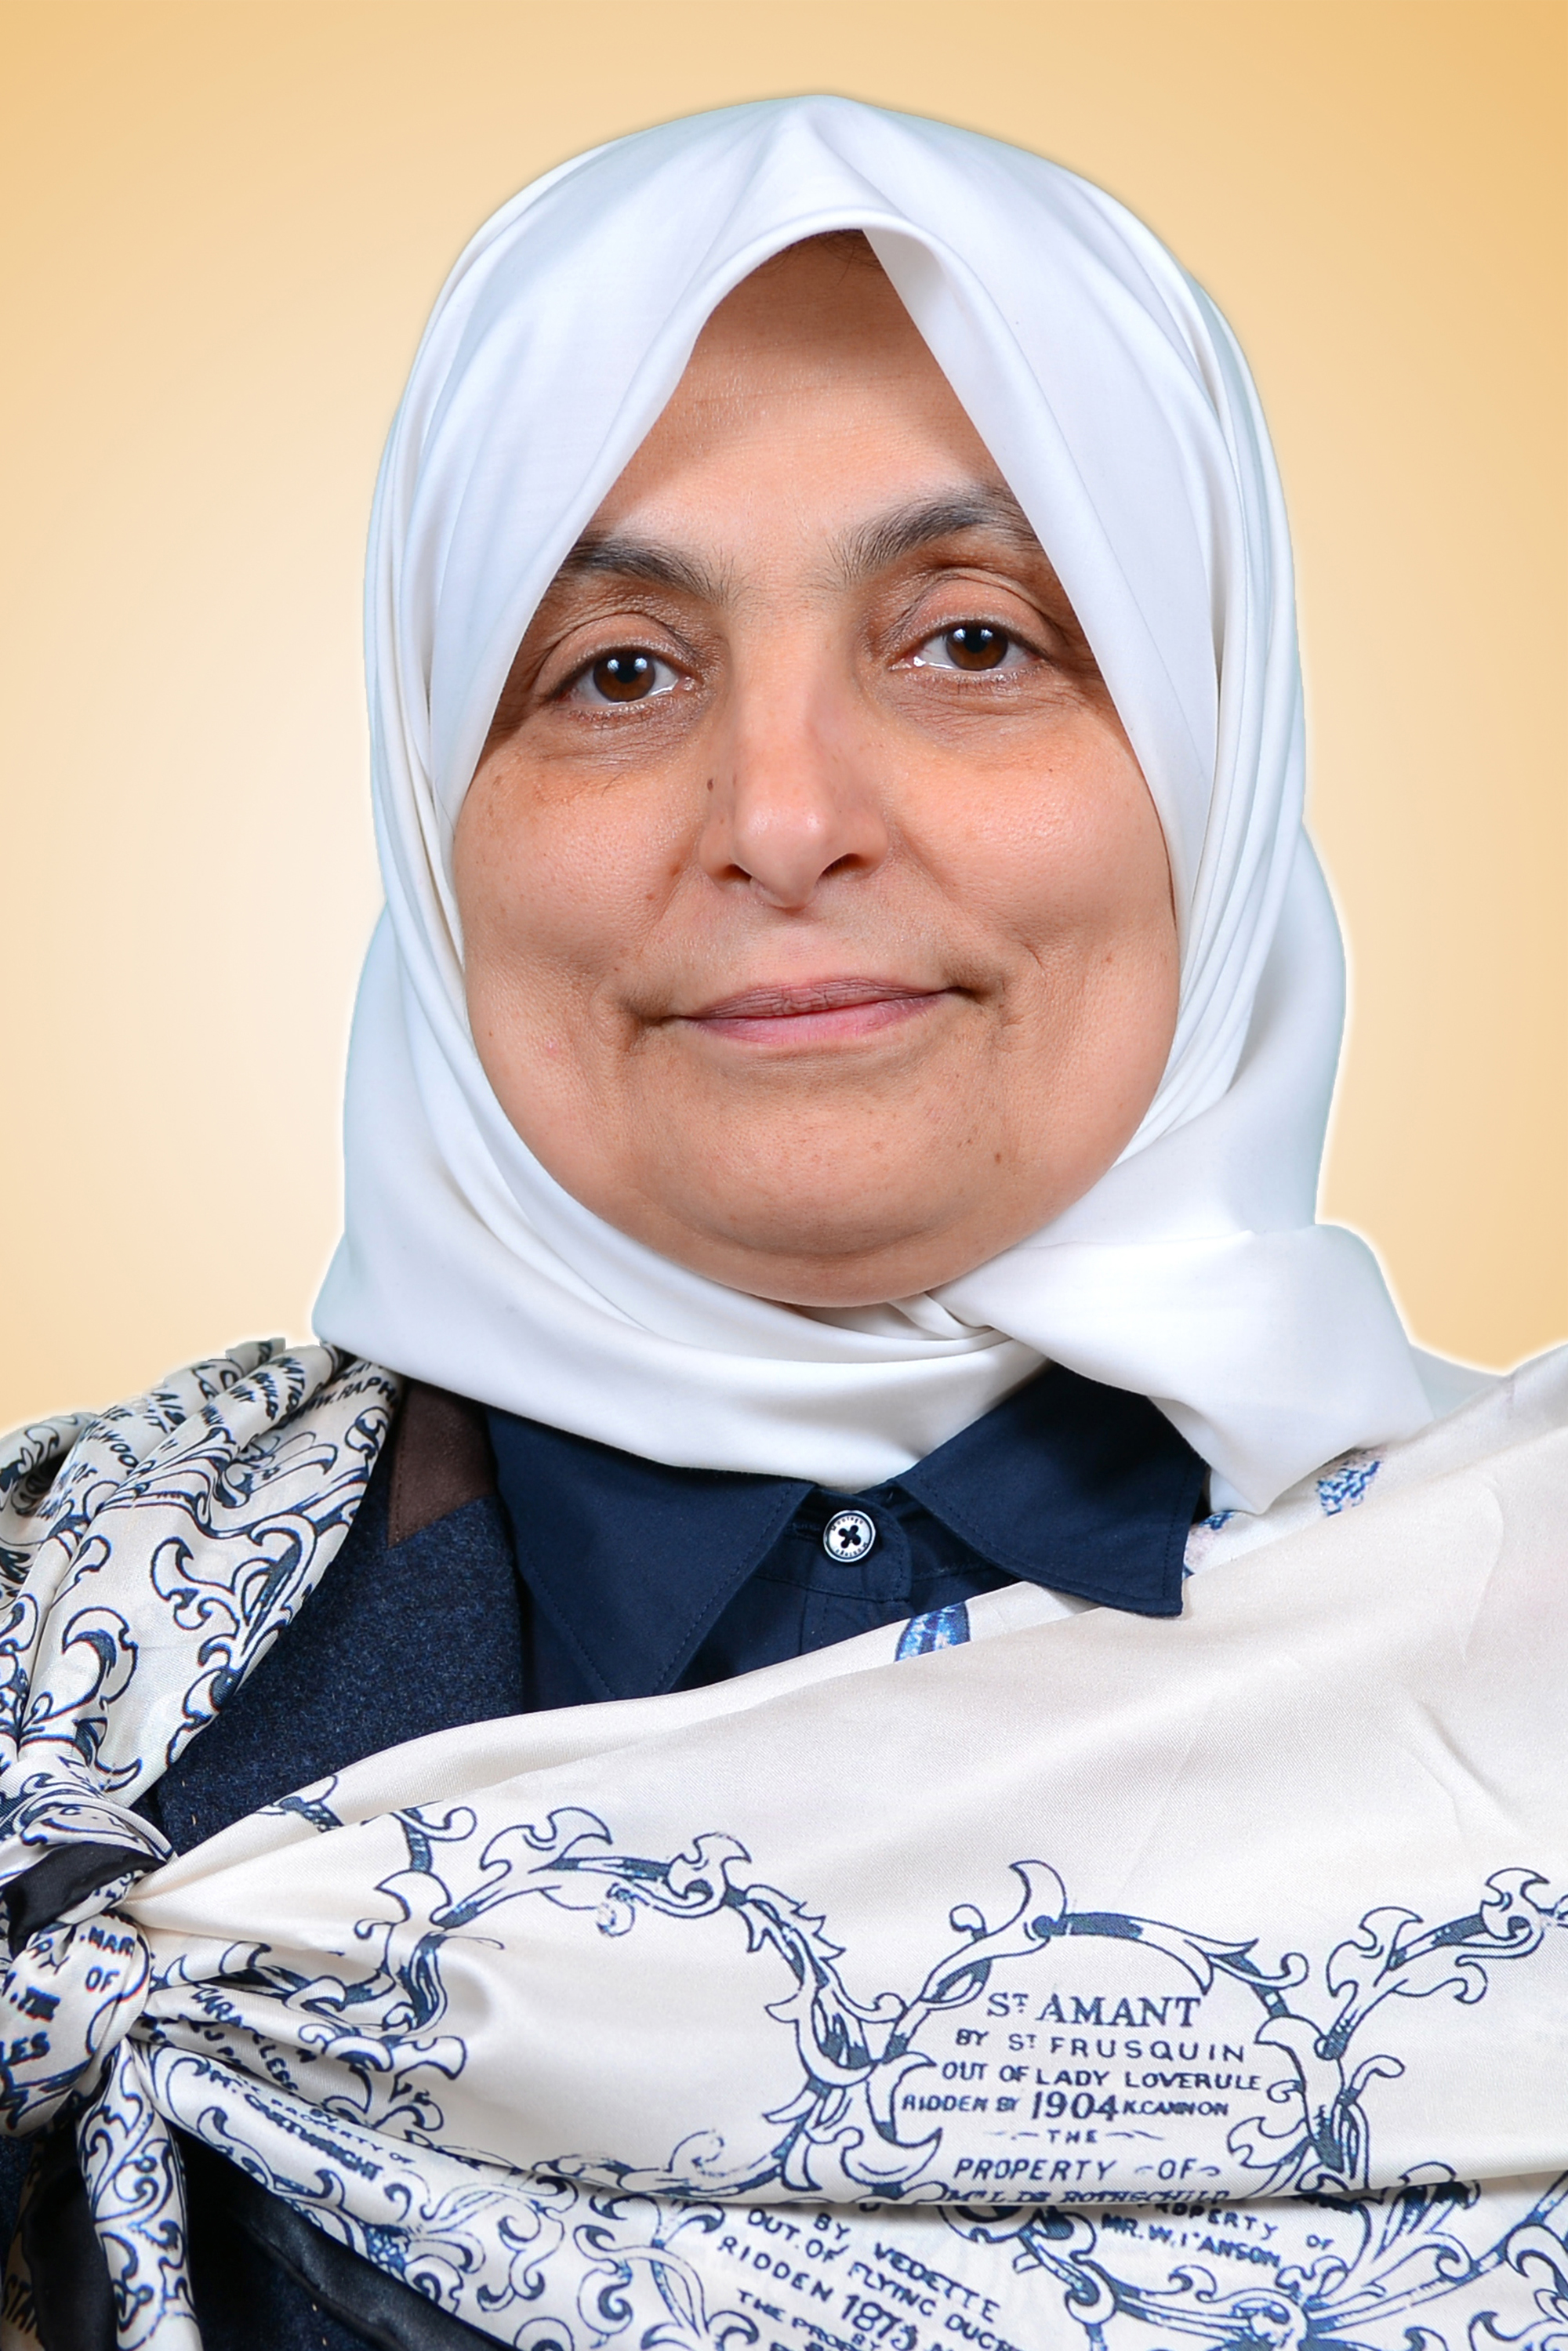 Minister of Social Affairs, Labor and Minister of State for Economic Affairs Hind Al-Sebeeh